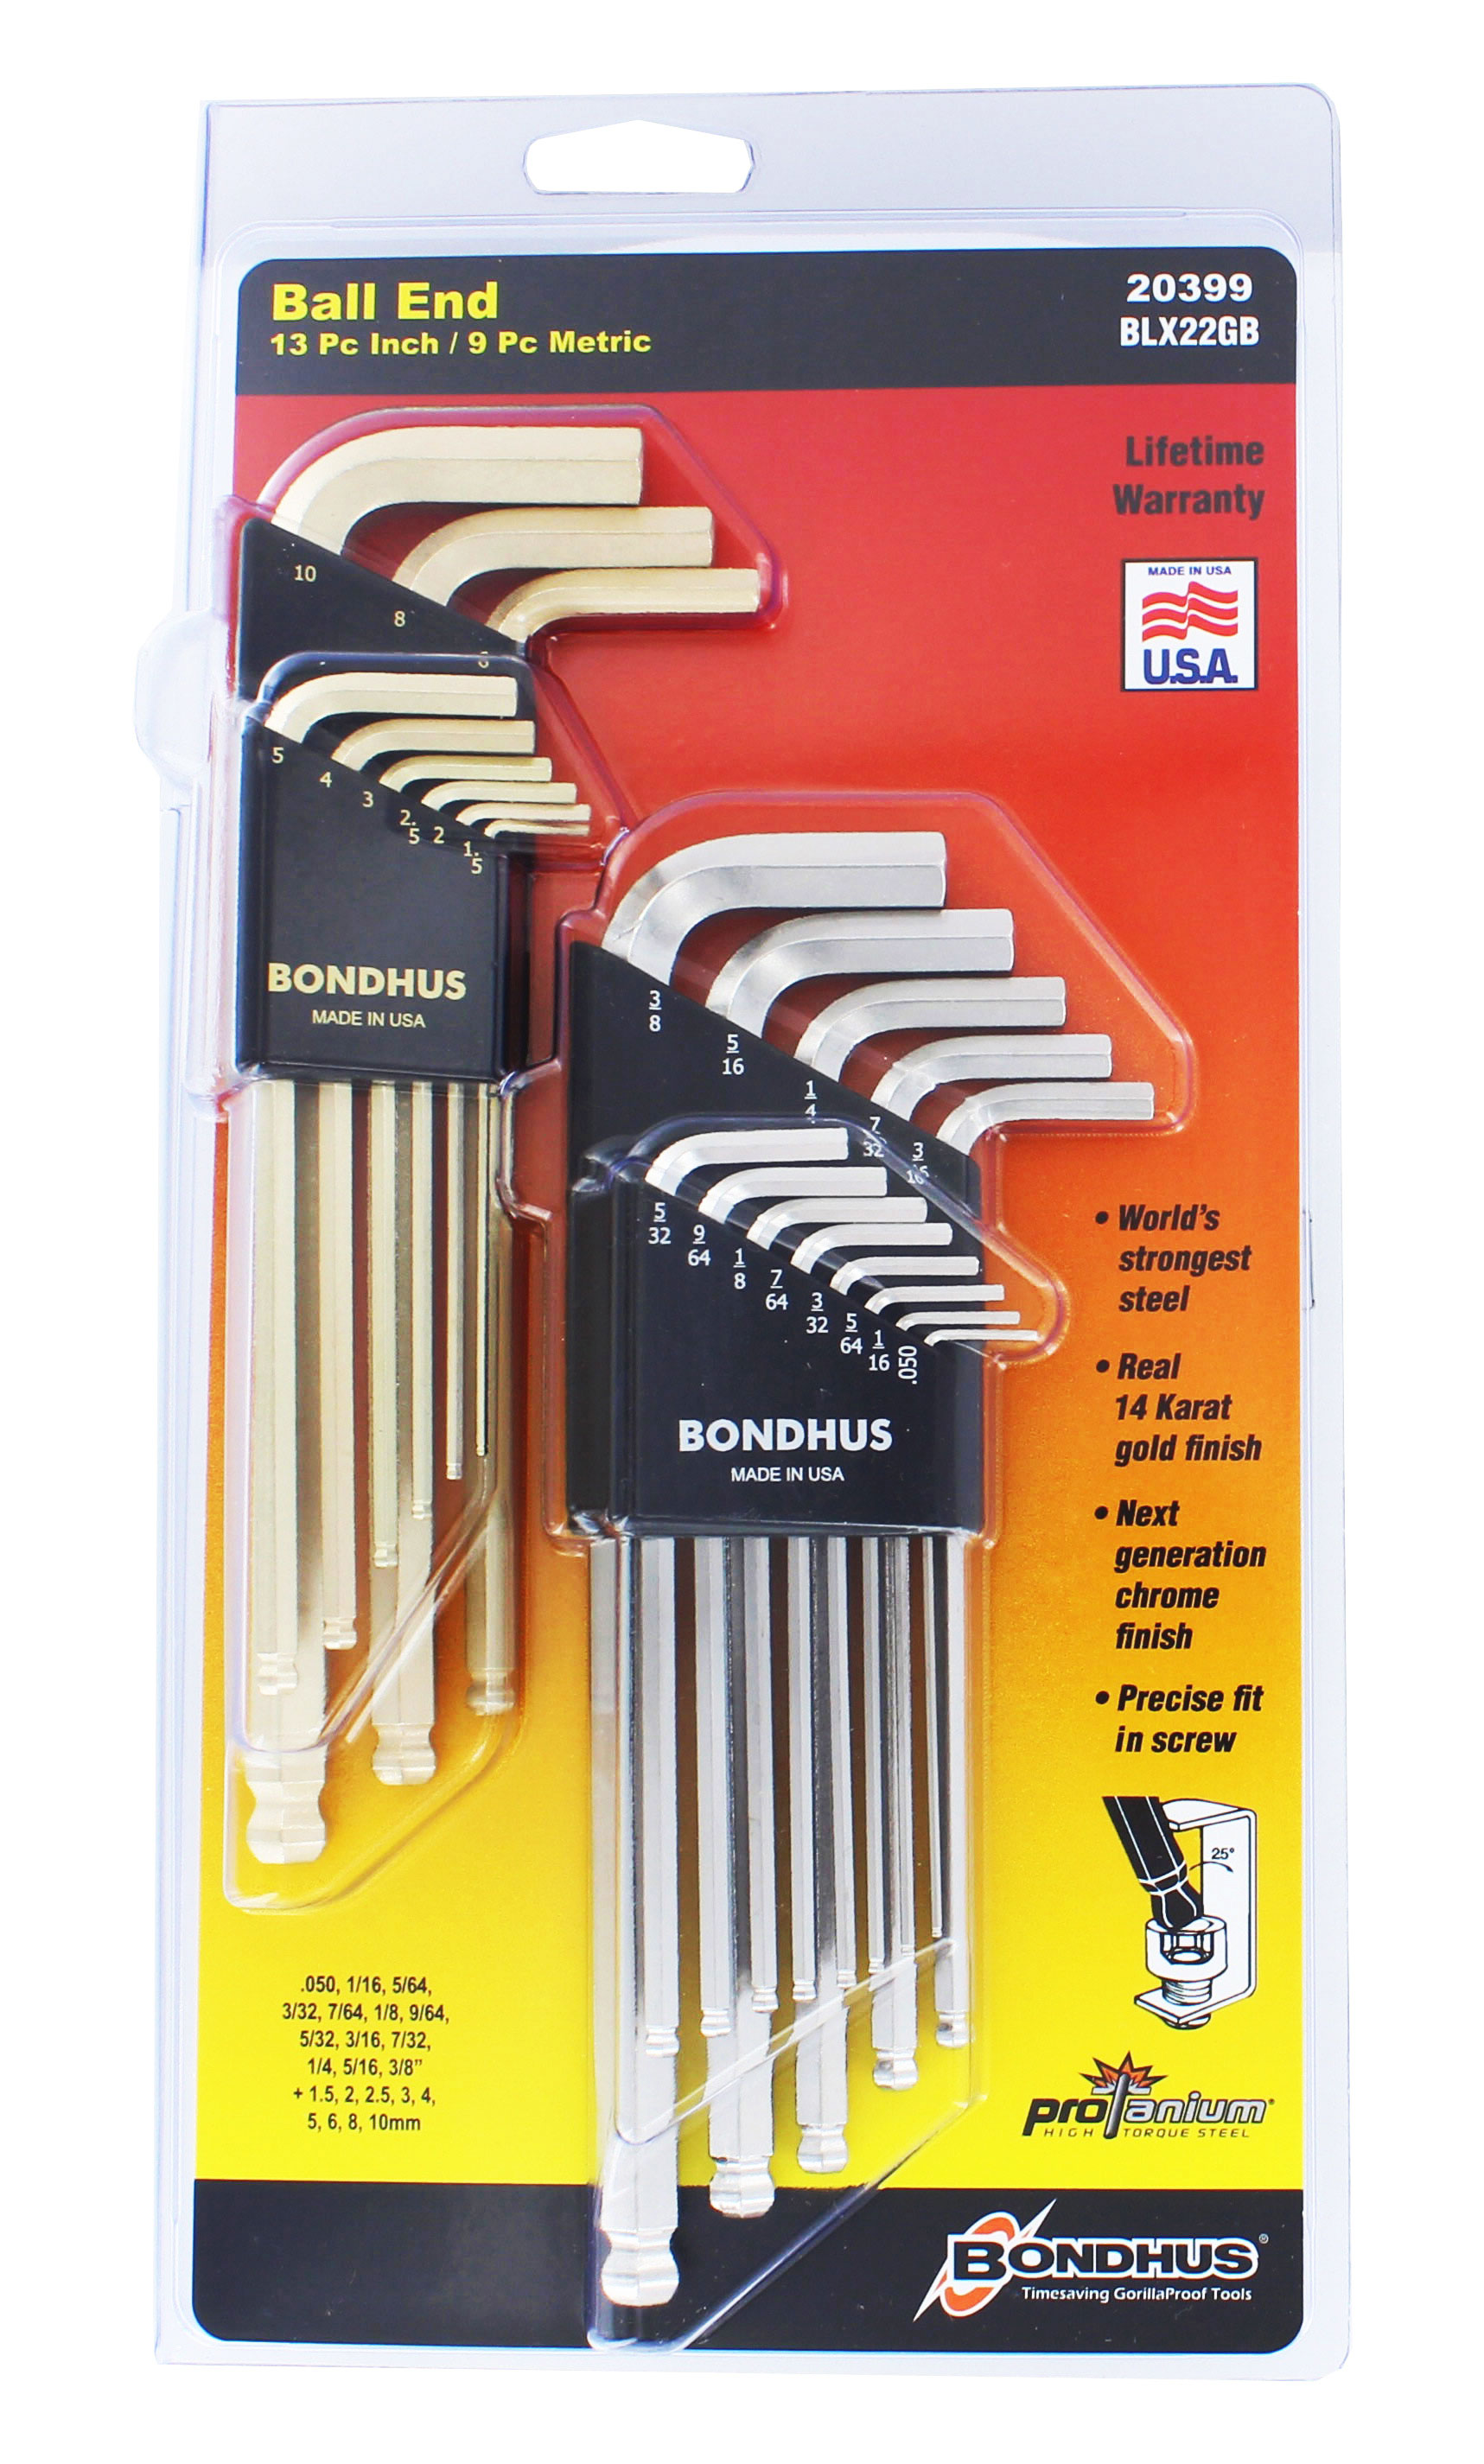 Bondhus Balldriver L-Wrench Double Pack - image 2 of 3